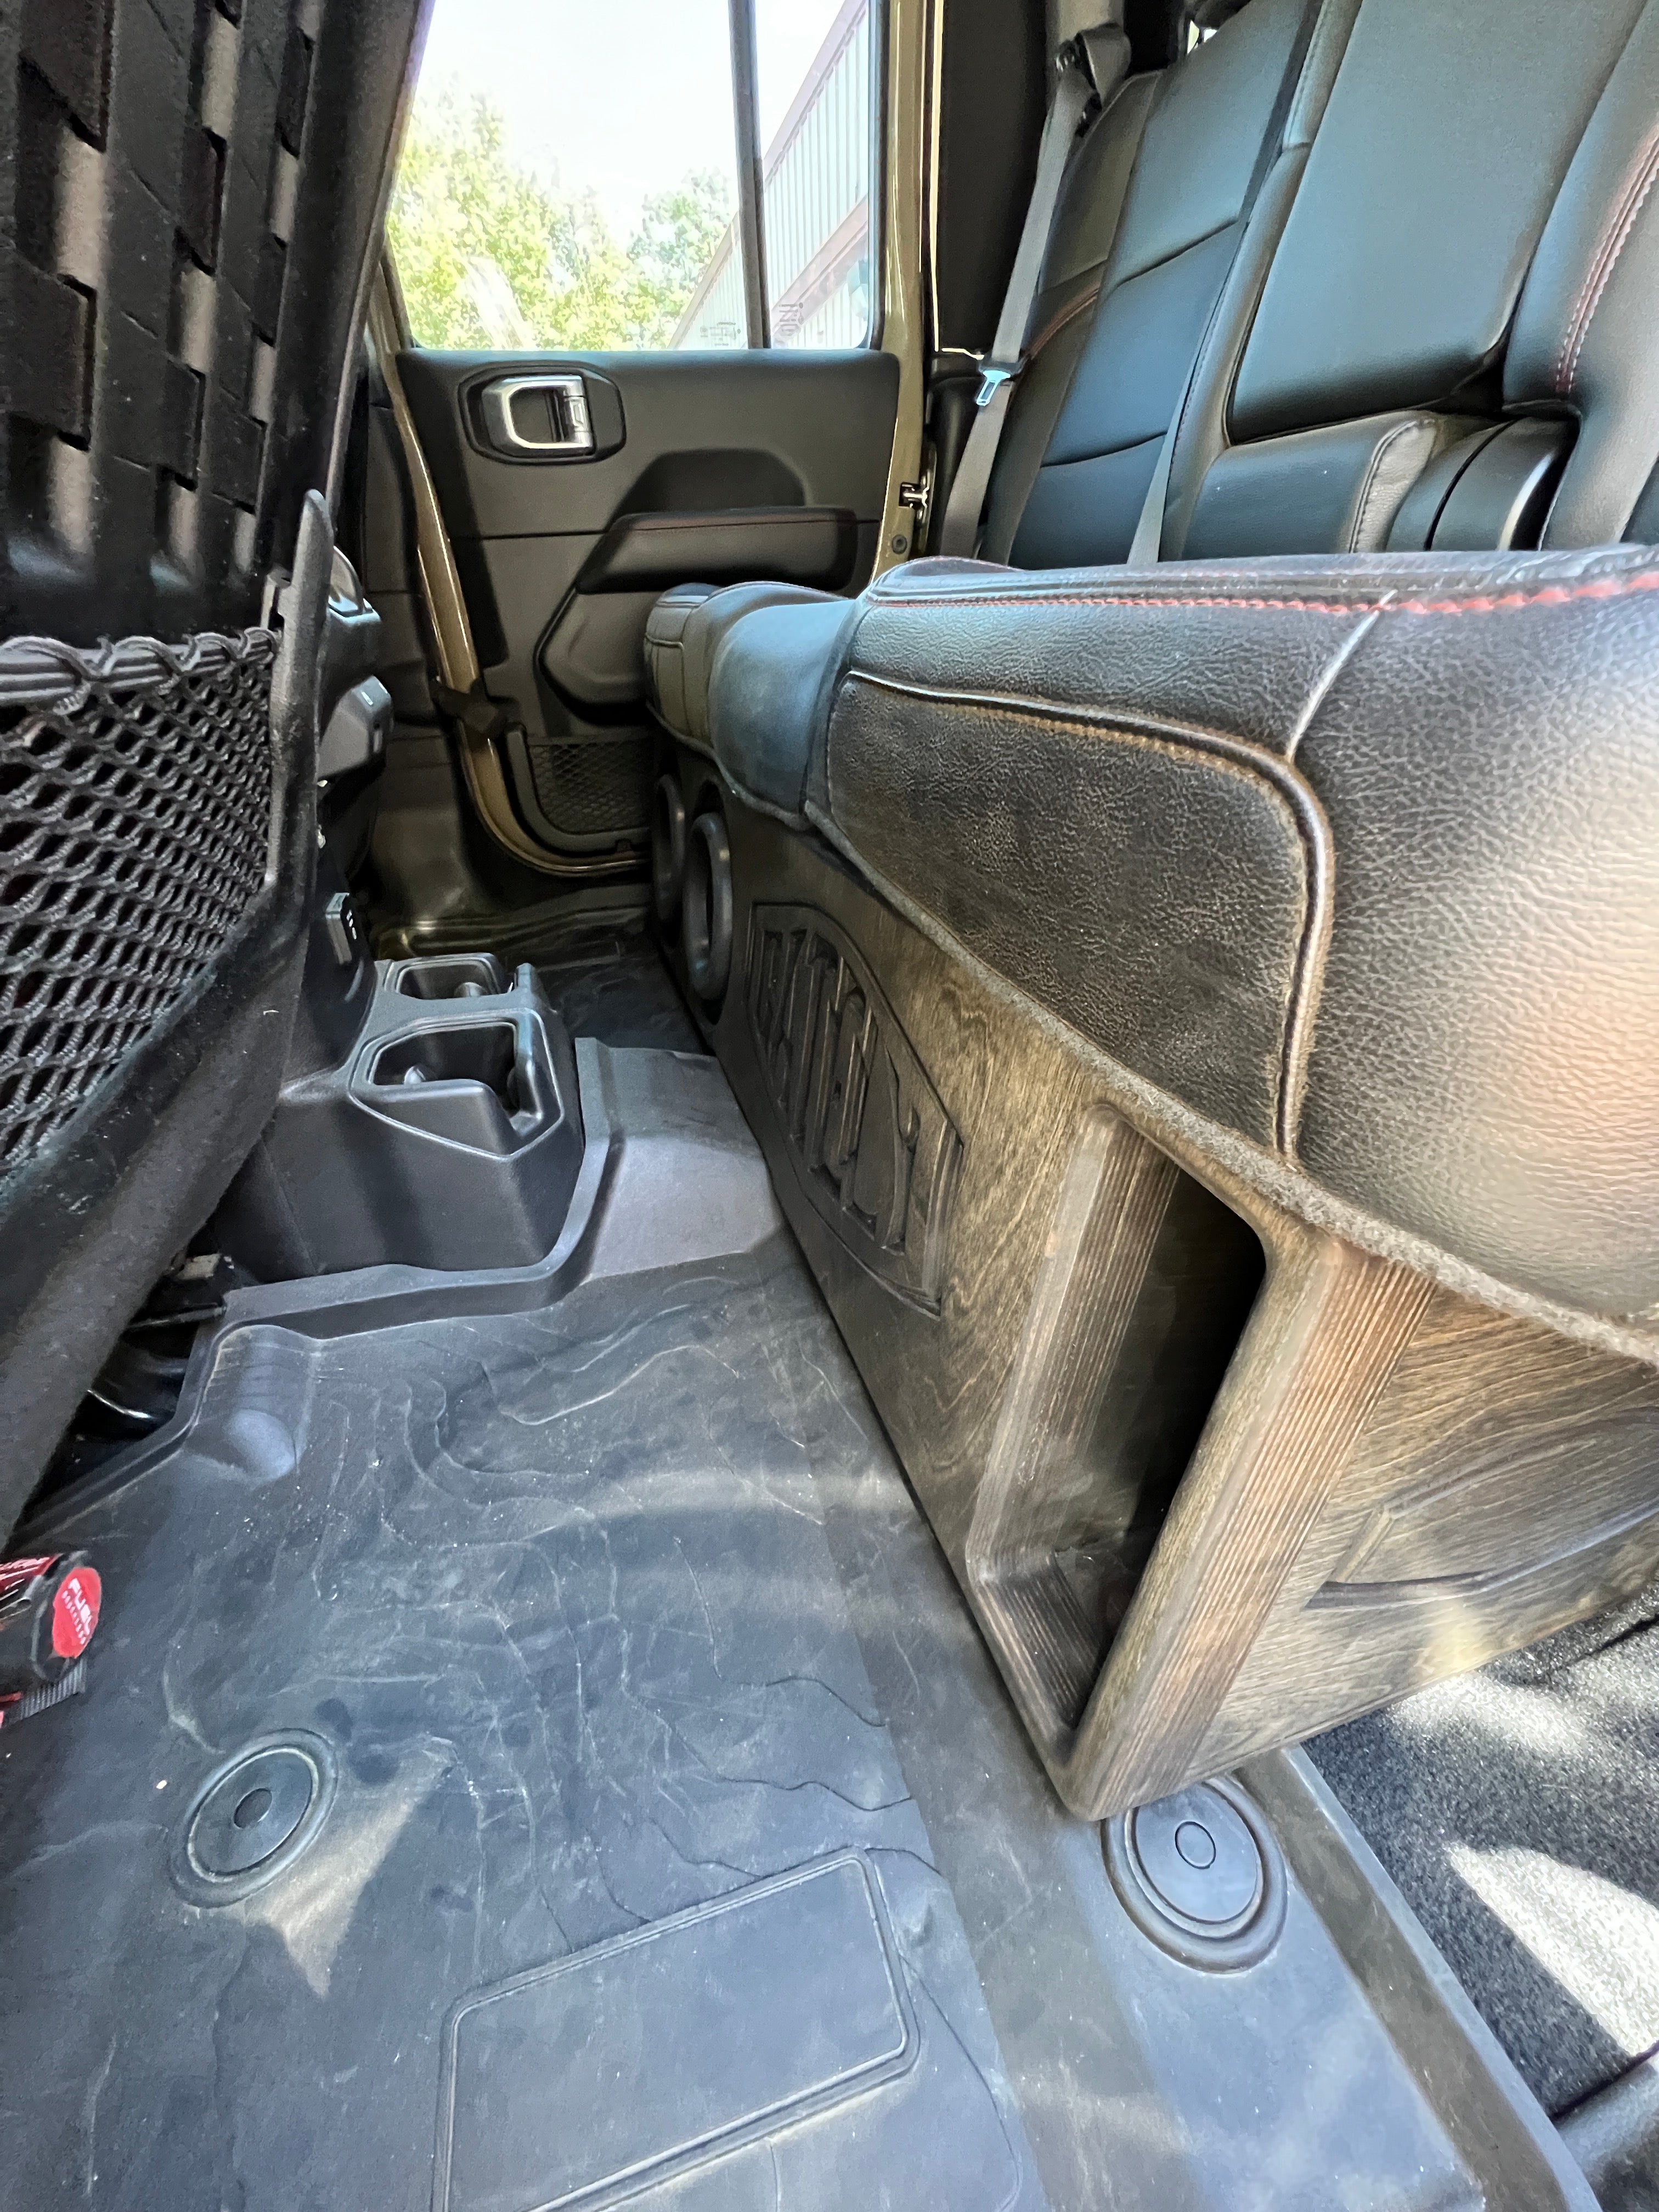 Jeep Gladiator 2 X 8 Under The Seat Enclosure - Seat Lift Included